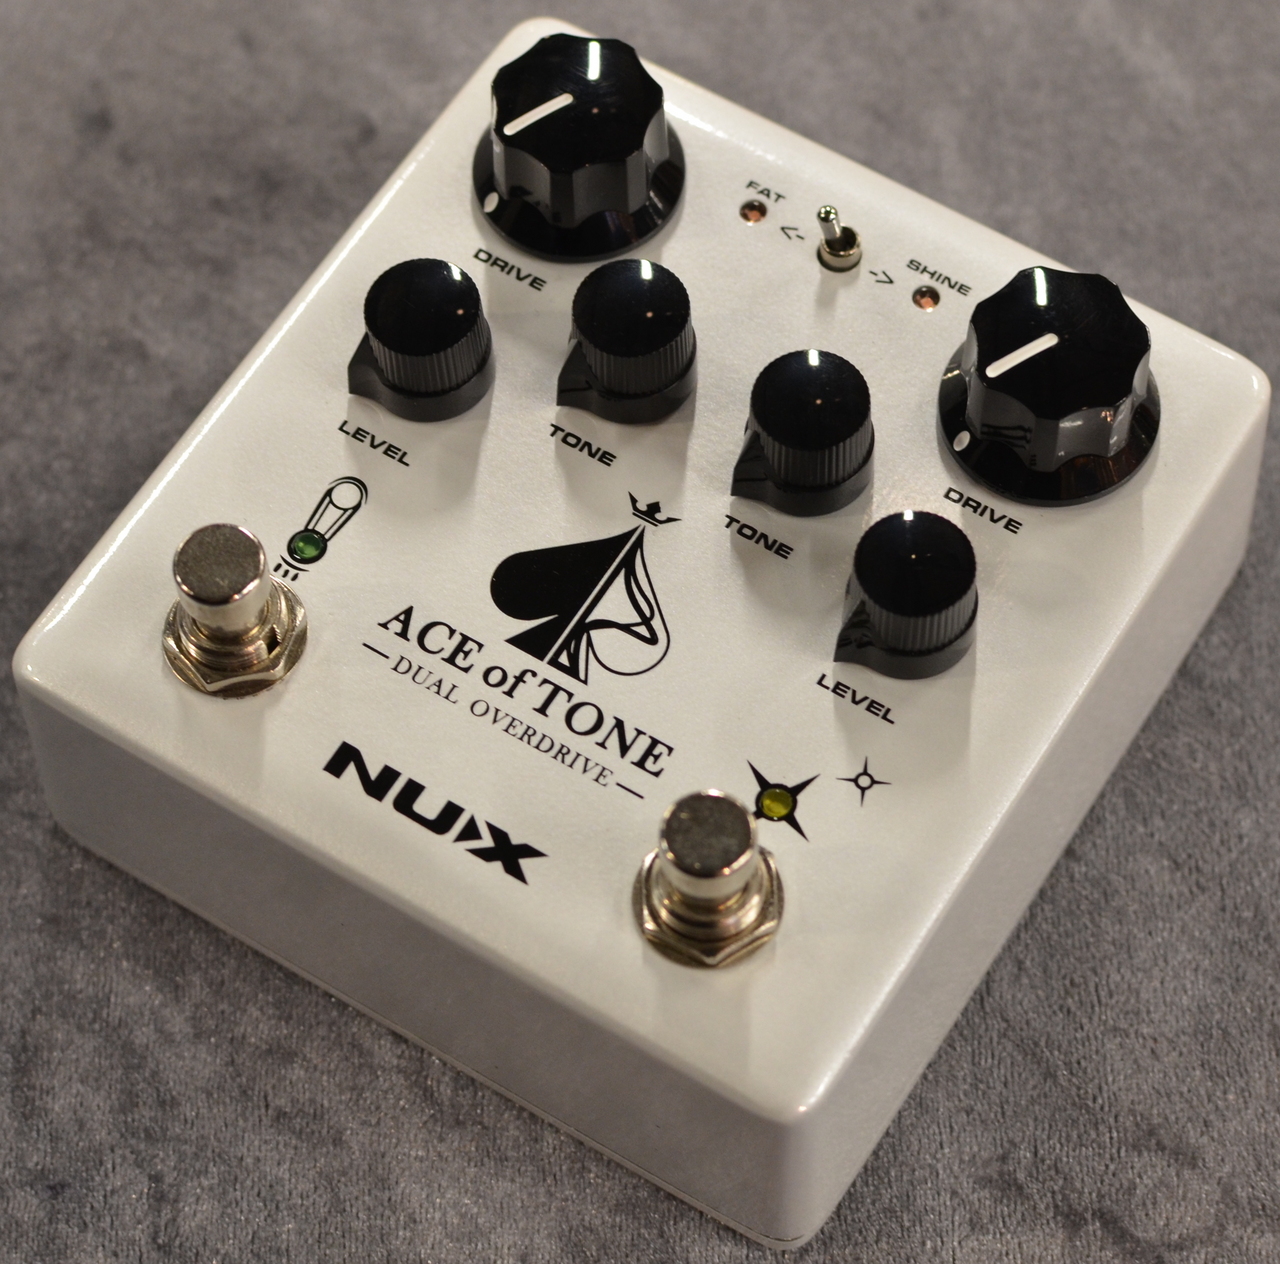 nux ACE of TONE -DUAL OVERDRIVE-【中古】（中古）【楽器検索デジマート】